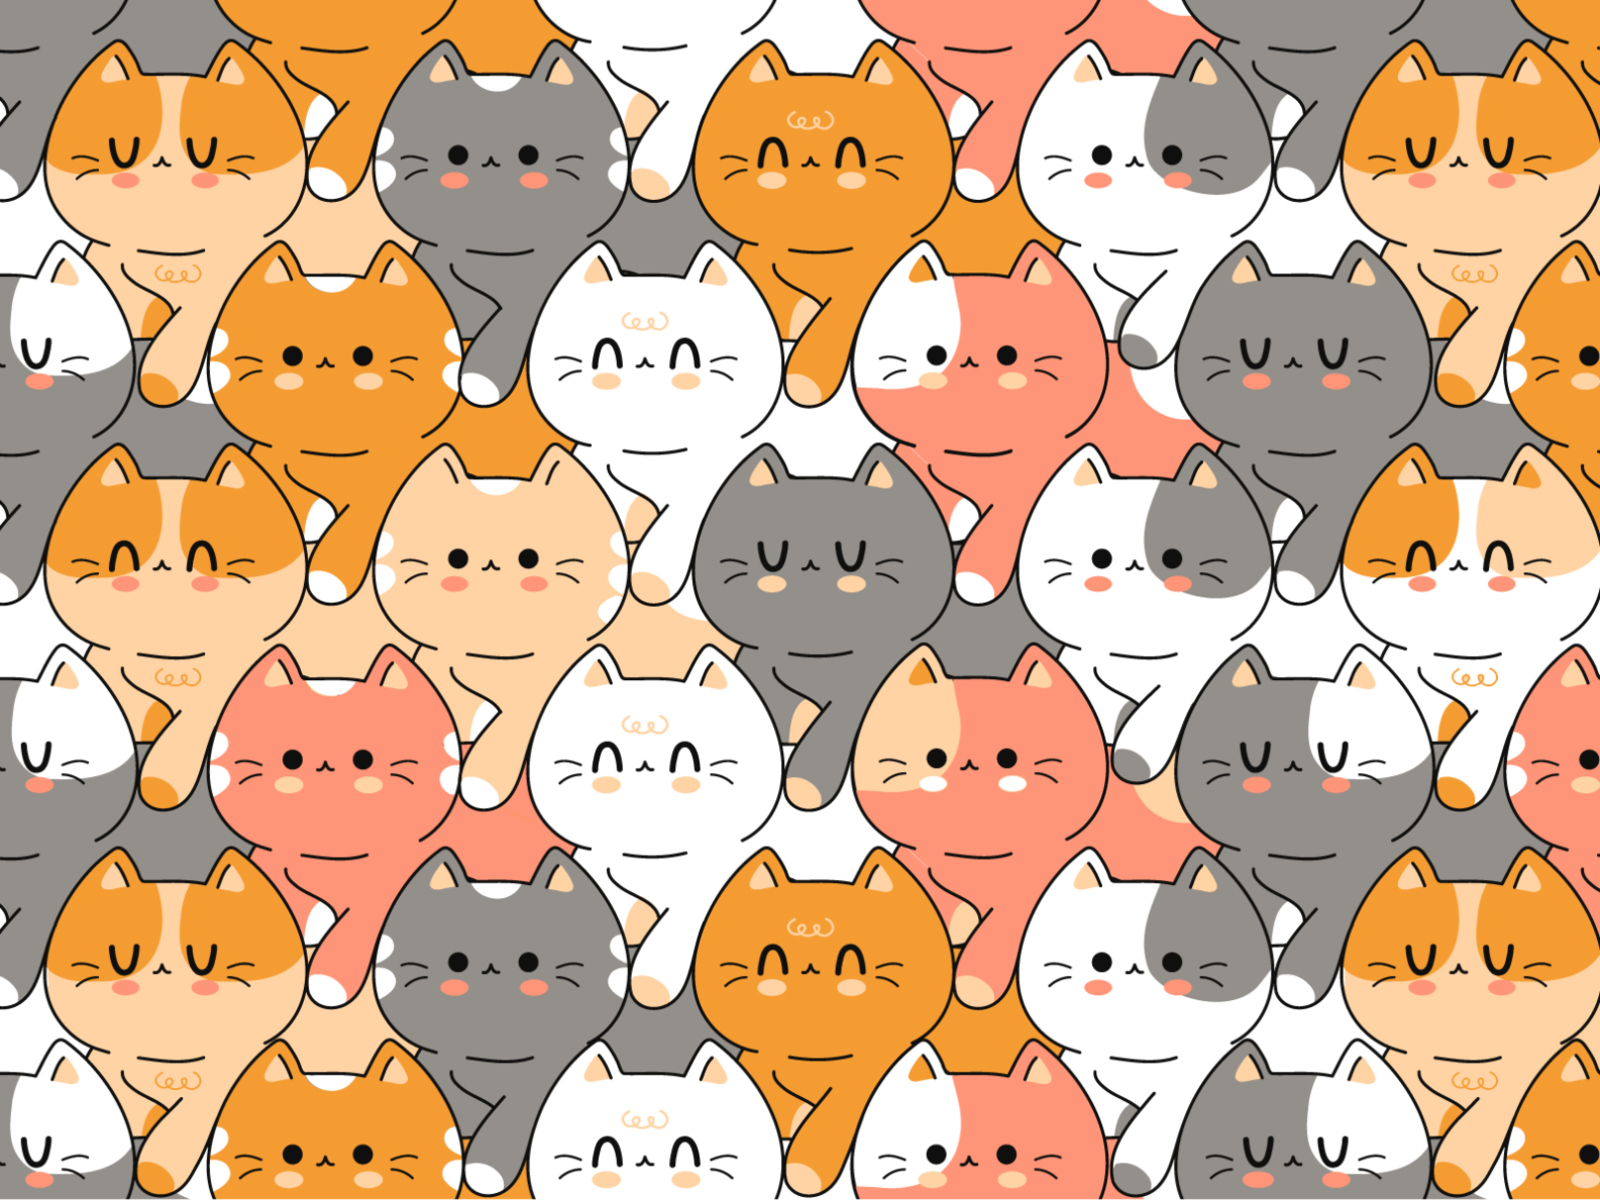 38300 Kawaii Cat Stock Photos Pictures  RoyaltyFree Images  iStock   Cute